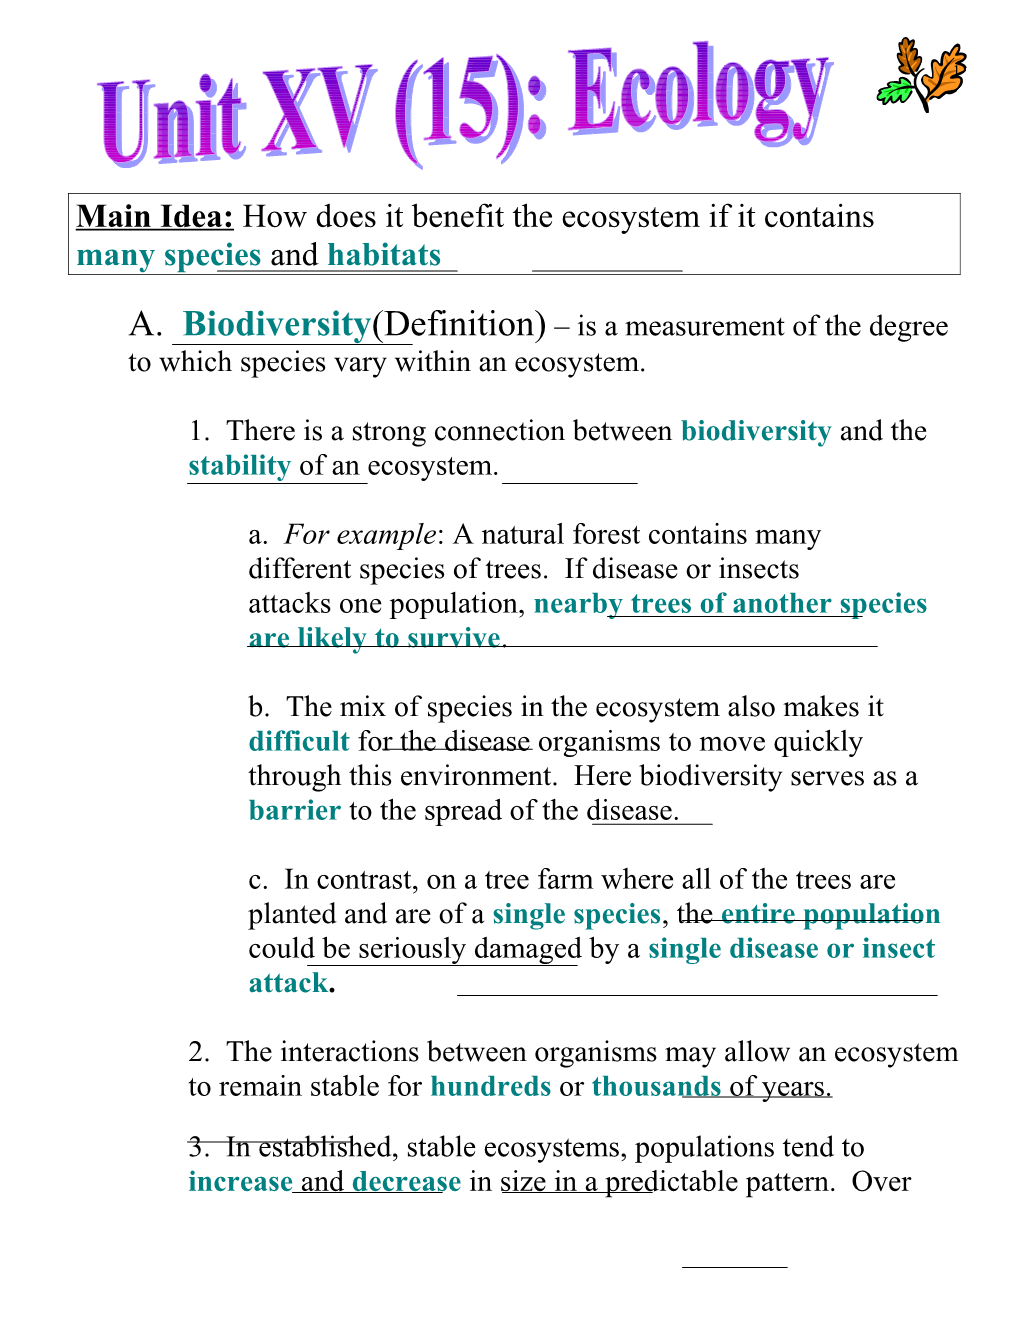 1. There Is a Strong Connection Between Biodiversity and the Stability of an Ecosystem